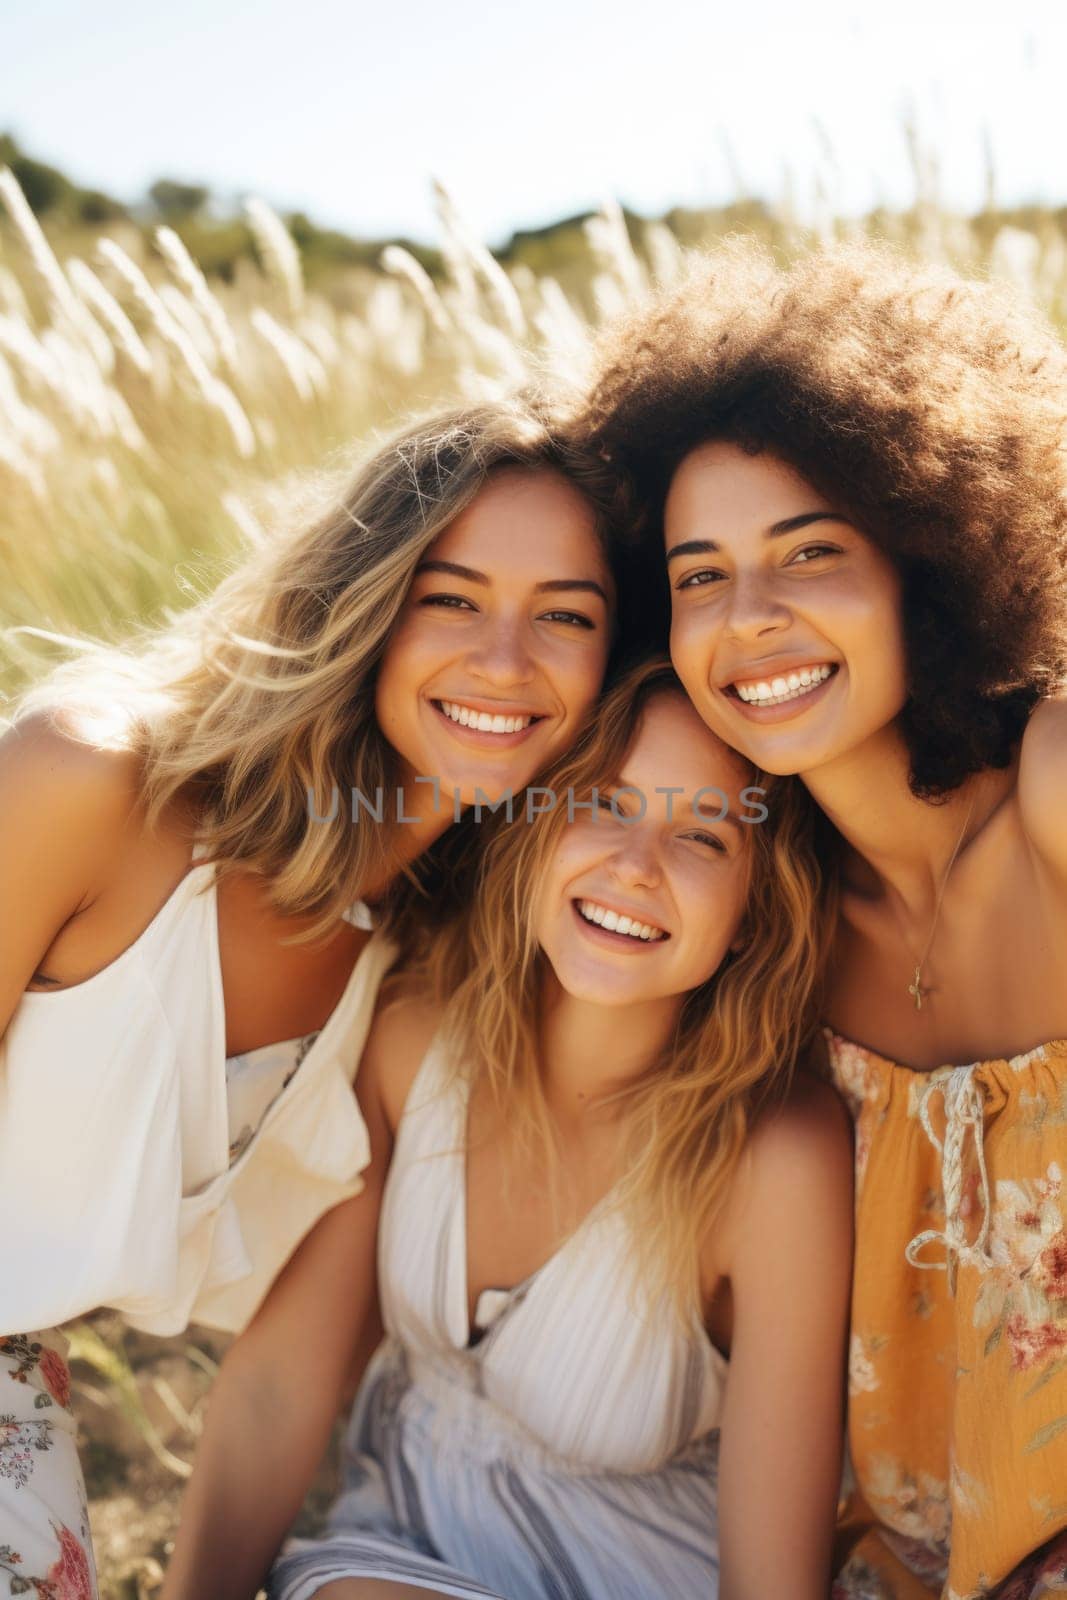 Happy young three women having fun outdoors in summer, celebrating friendship and good times. AI Generated